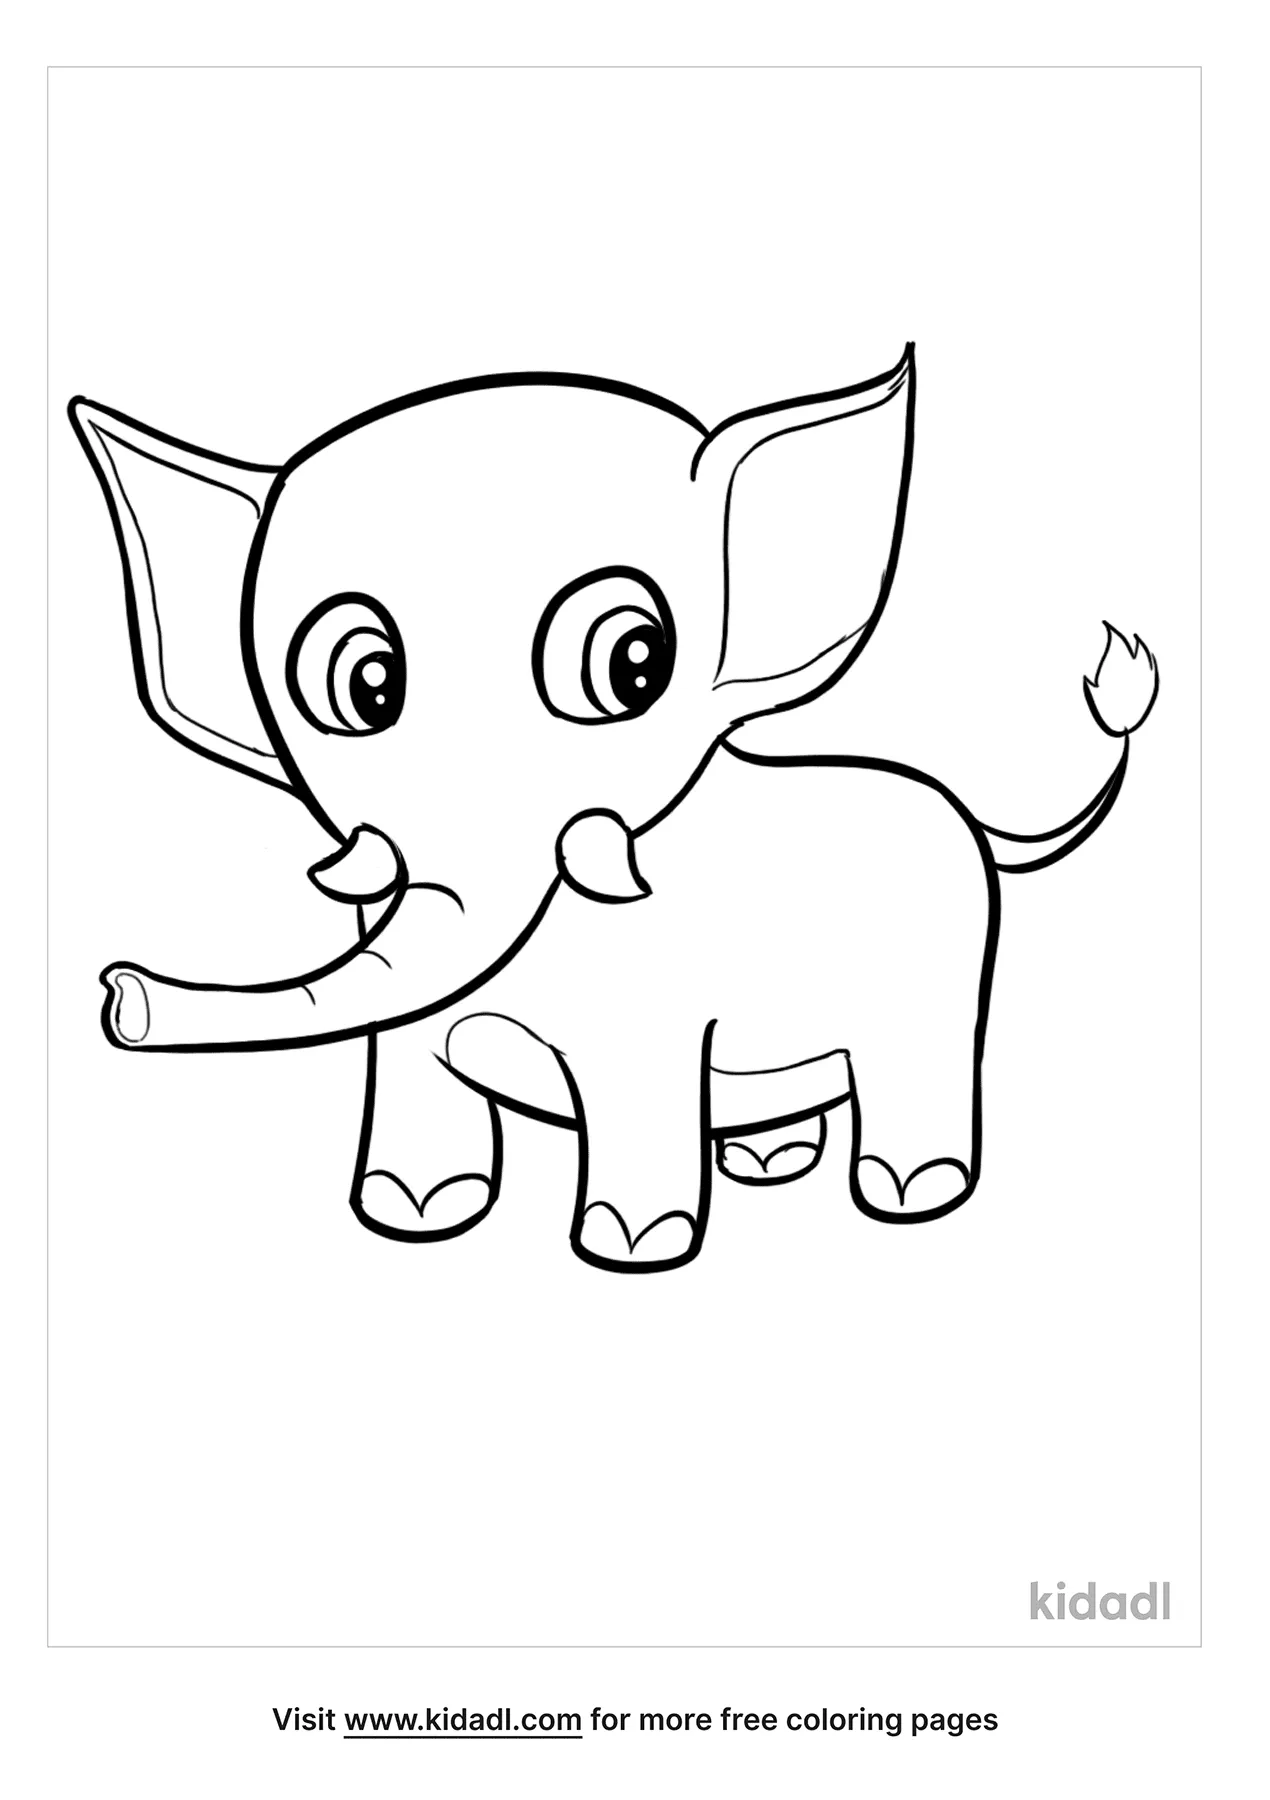 Baby Animal Coloring Pages   Free Animals Coloring Pages   Kidadl